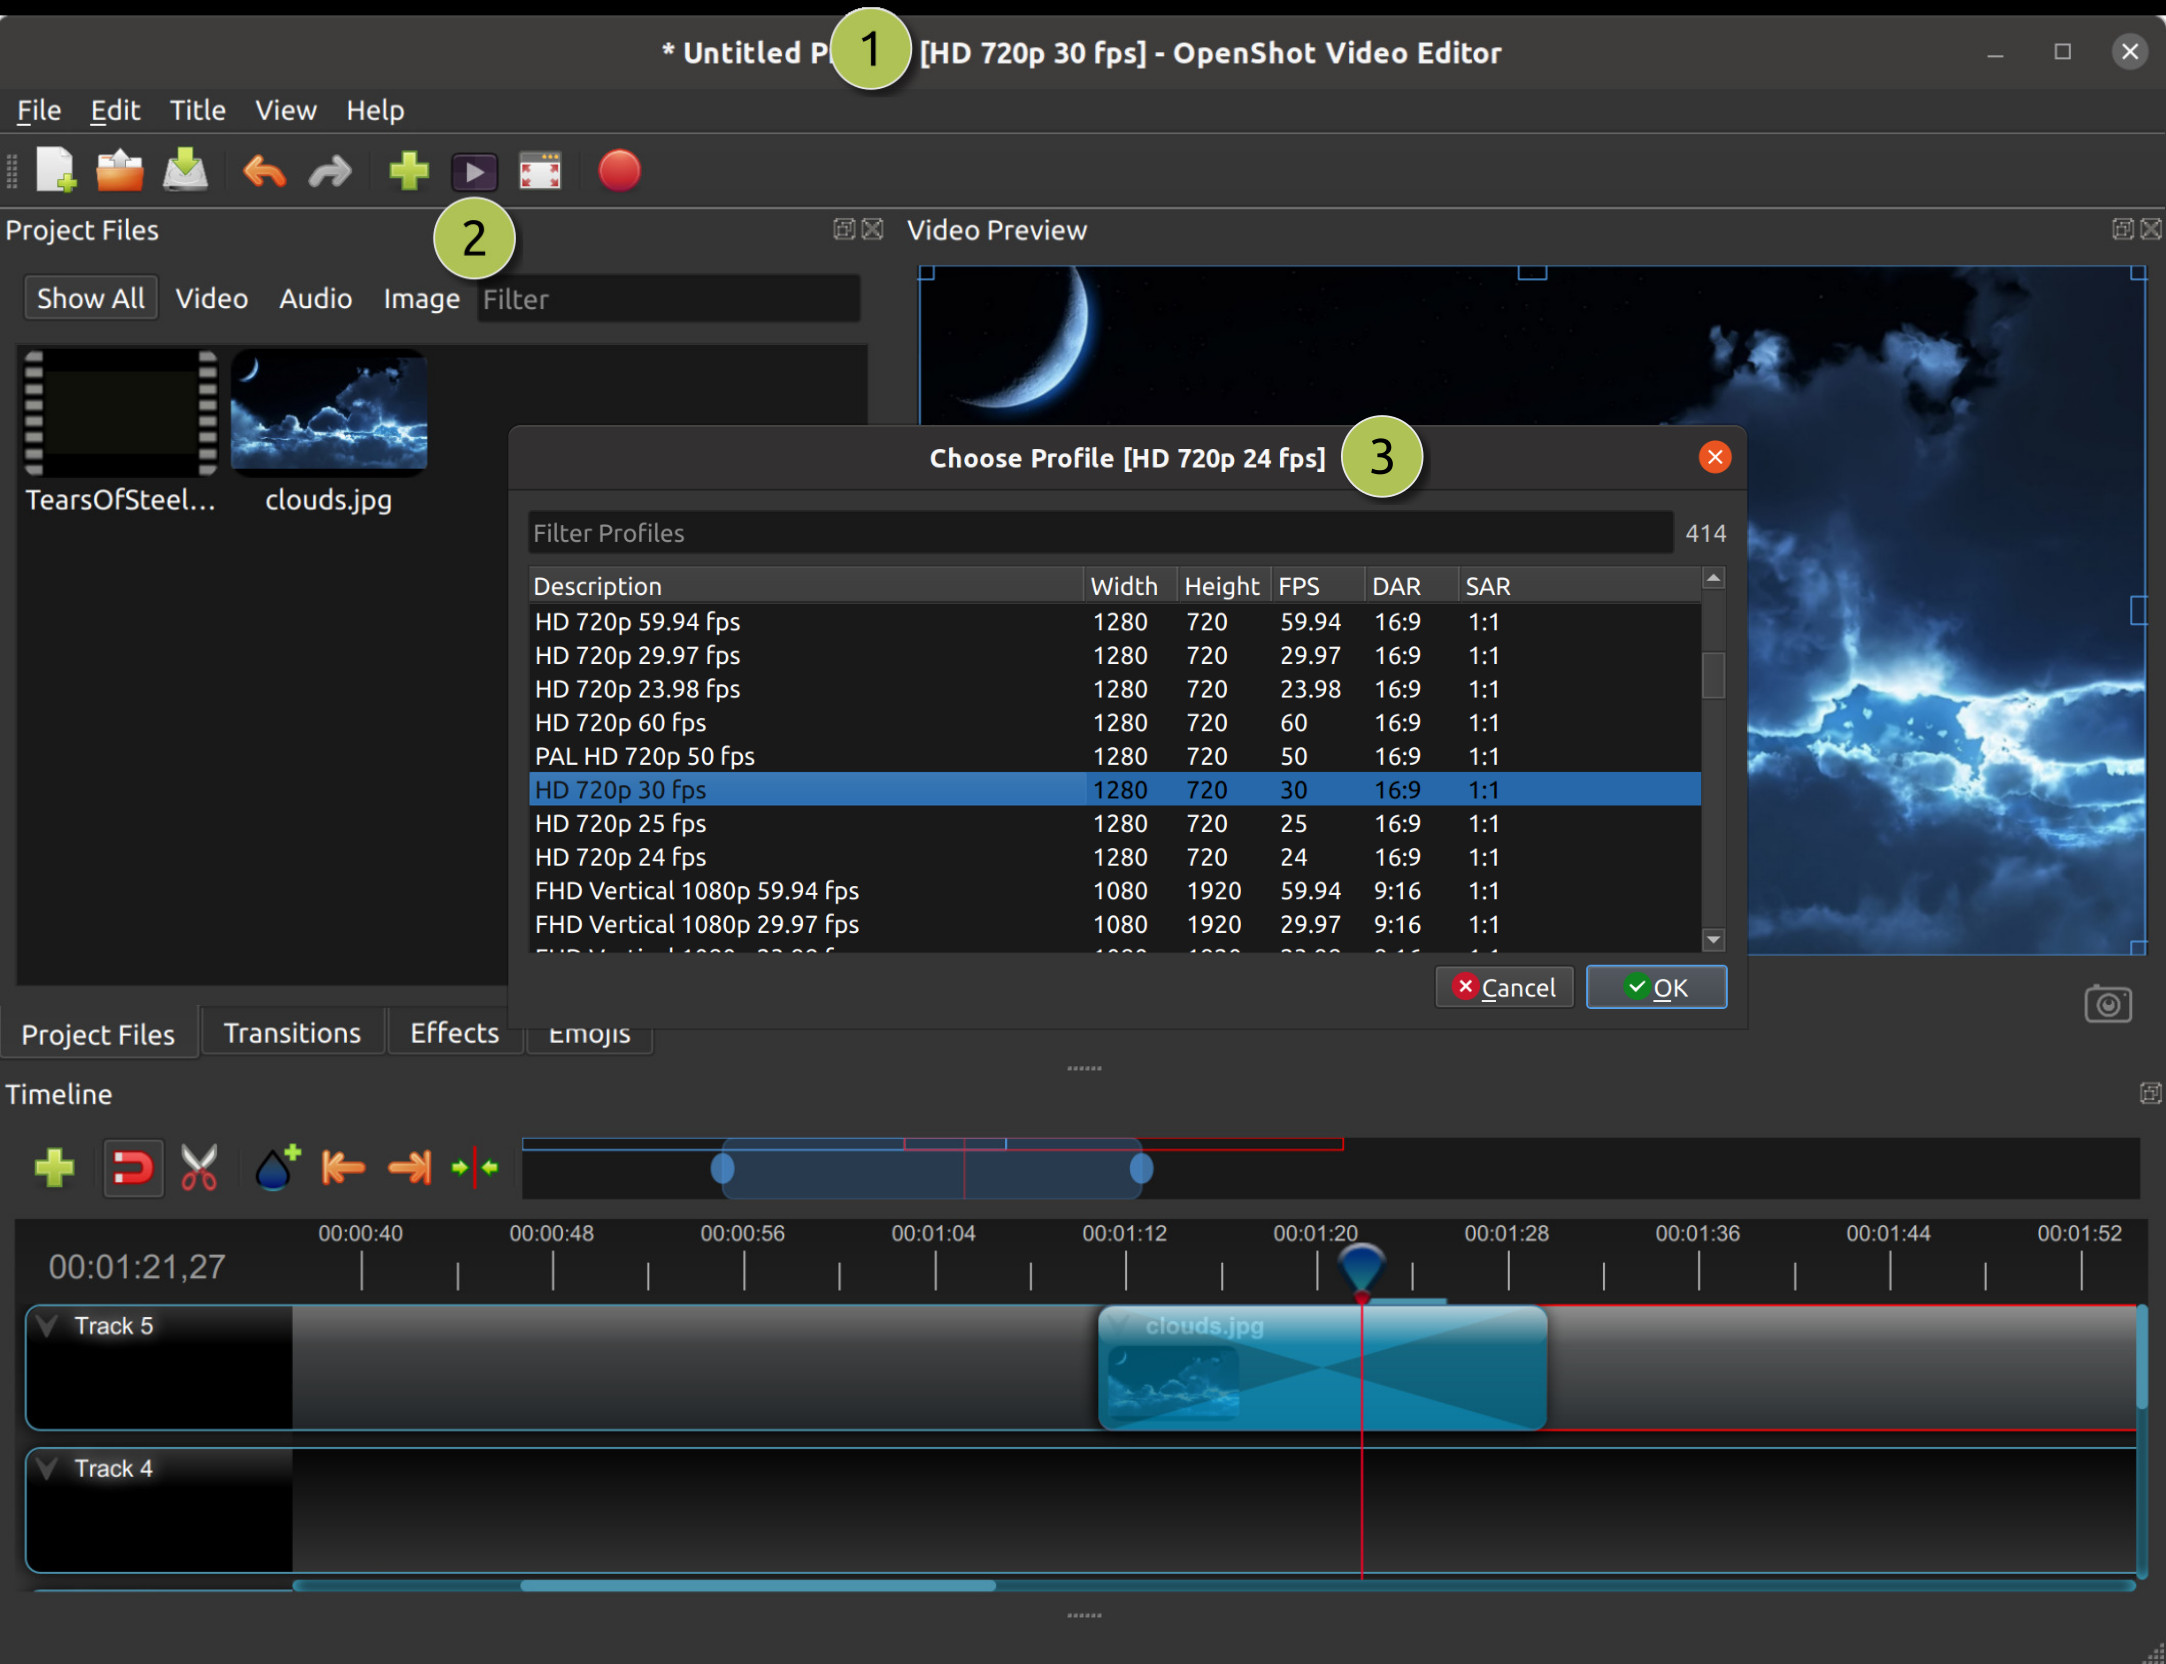 how to use openshot video editor